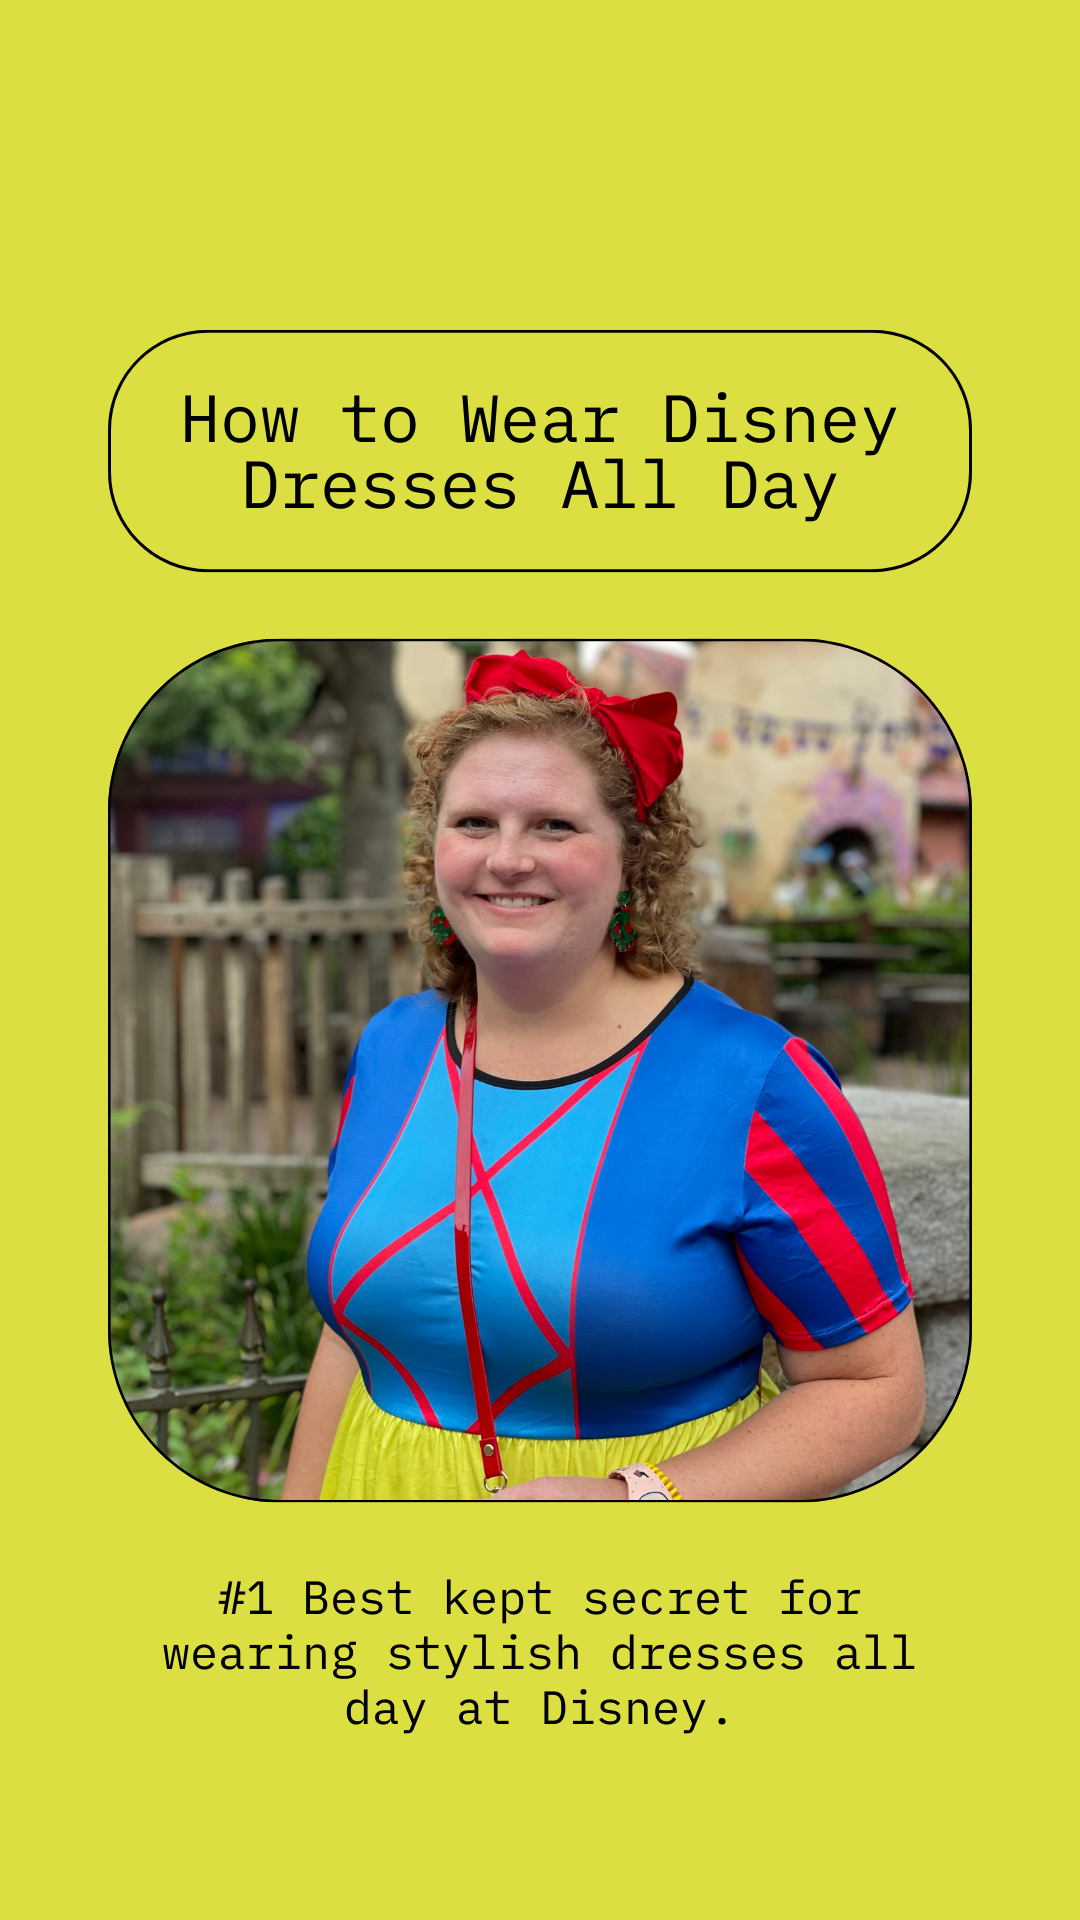 #1 Best Tool to Wear Disney Dresses All Day